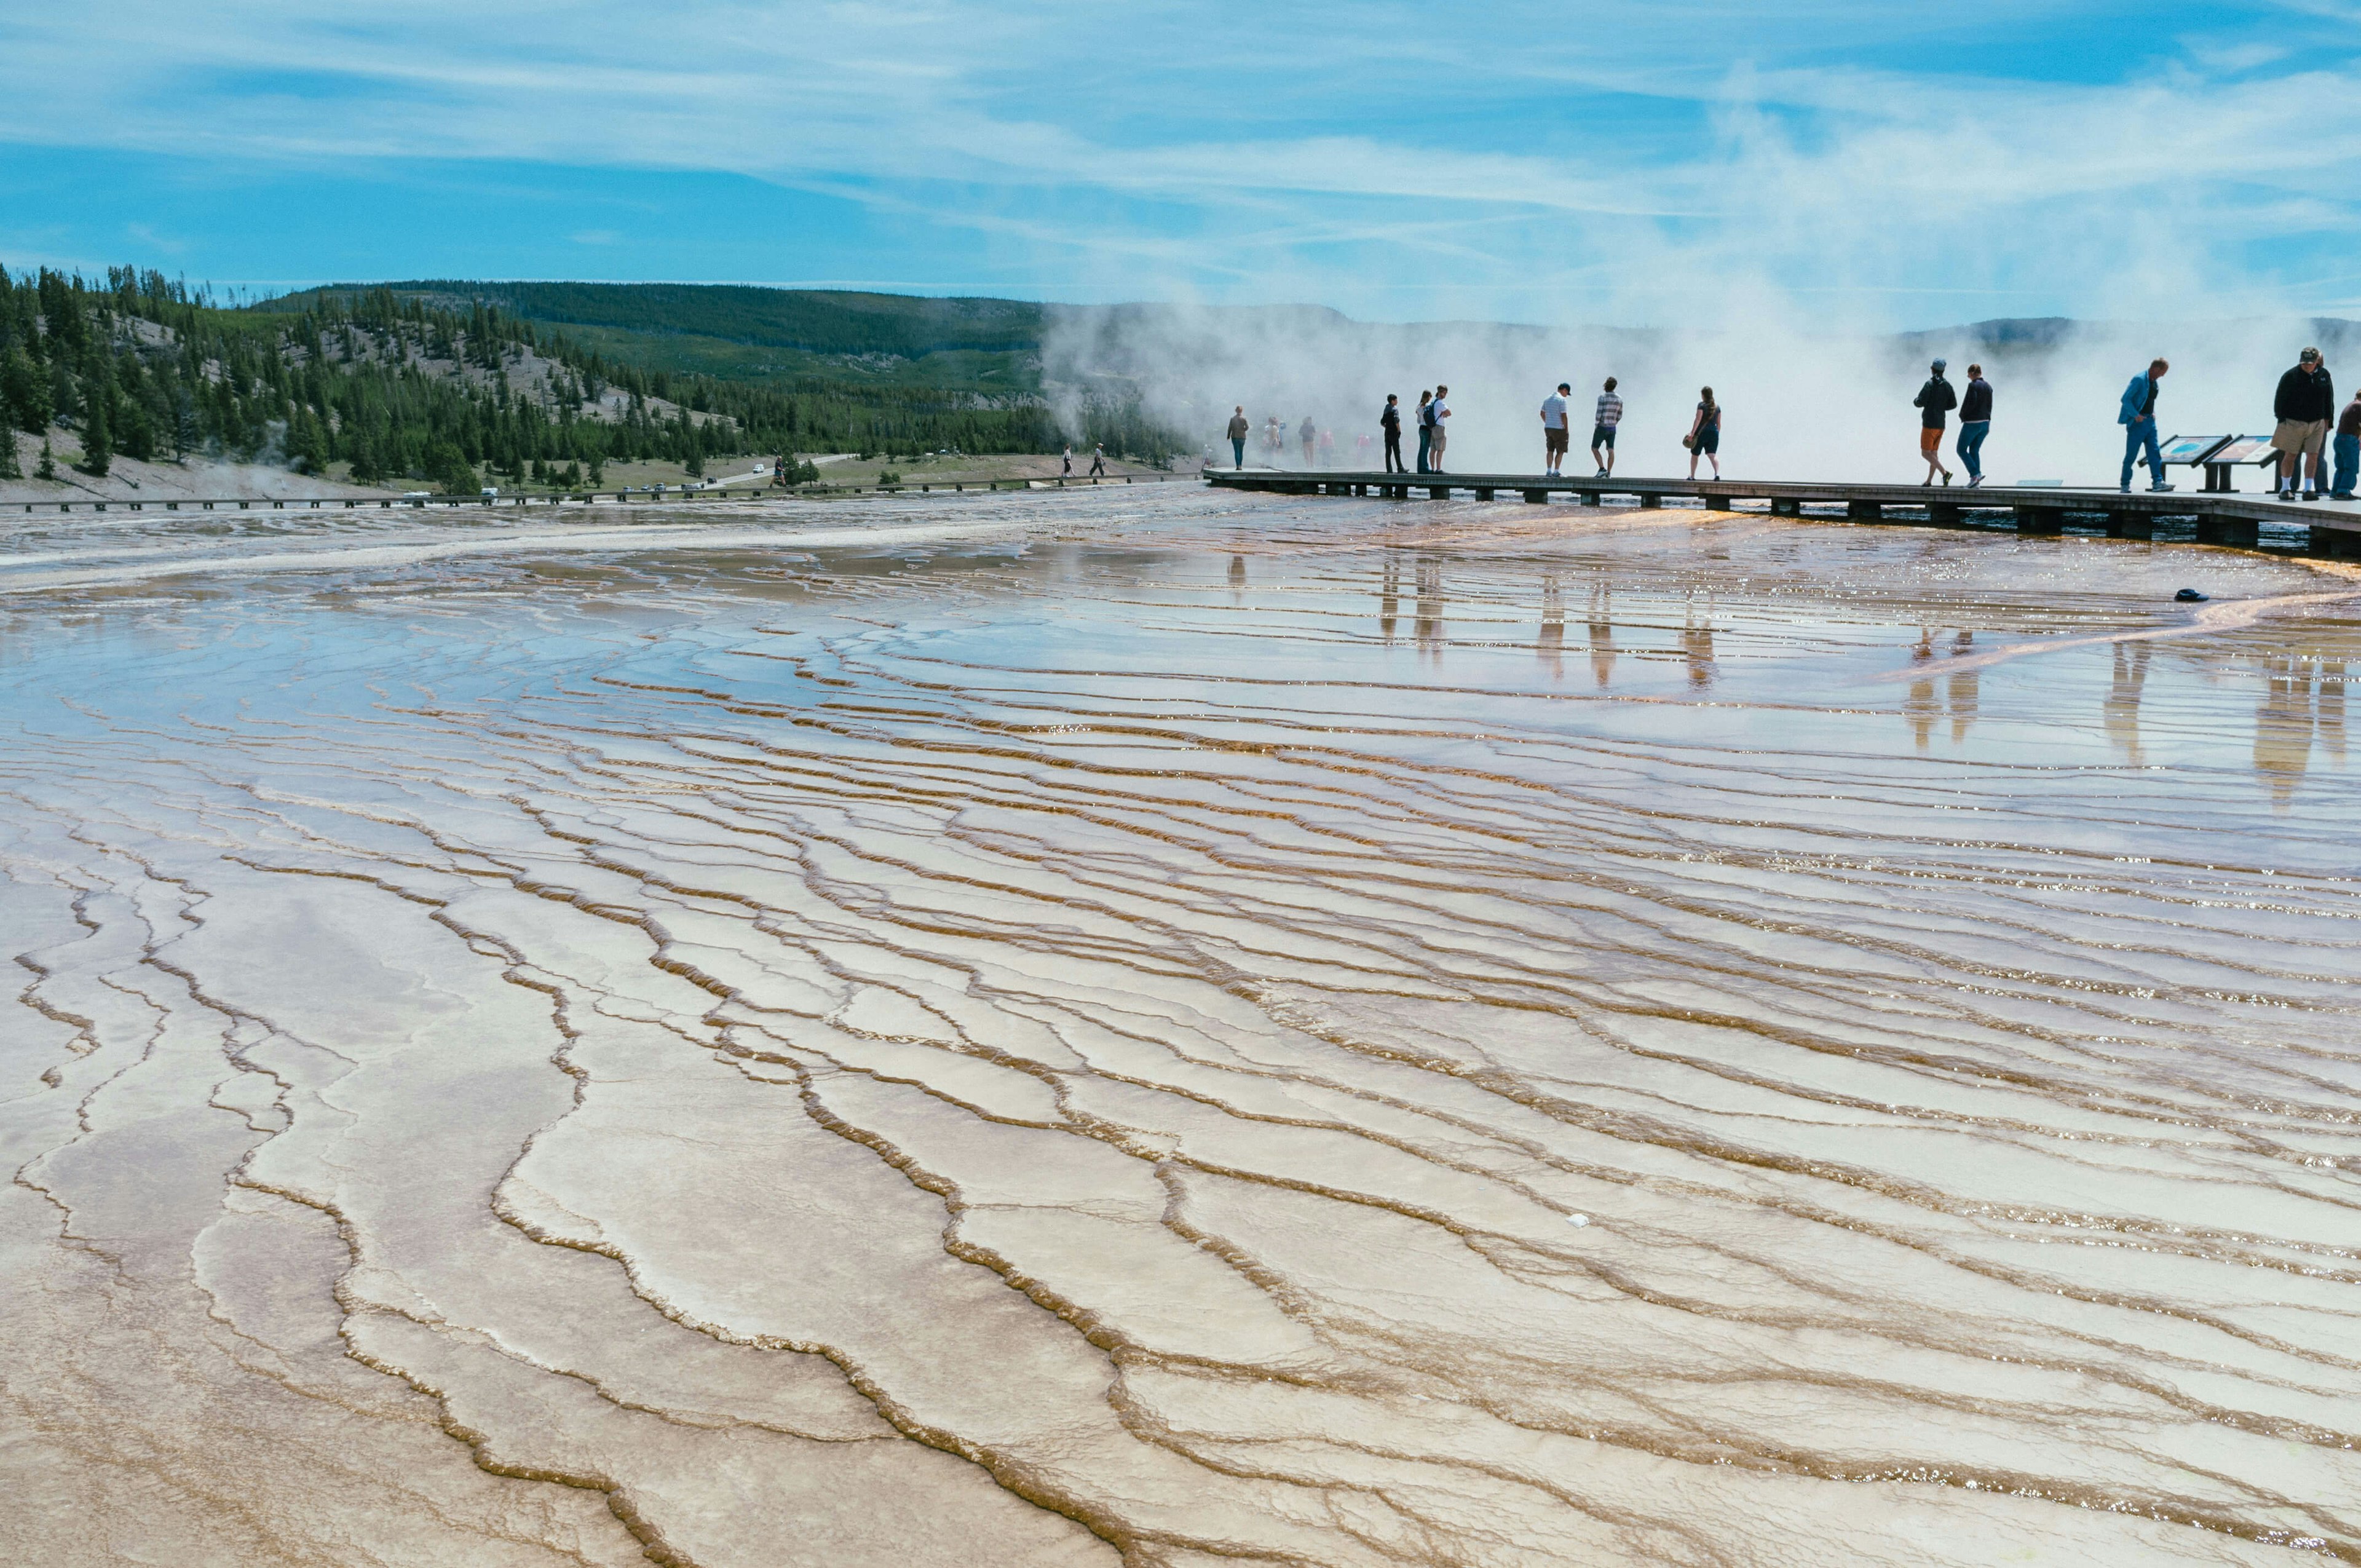 Tourists walking around the Grand Prismatic spring in Yellowstone National Park, low-angle view with mud and shallow water in the foreground